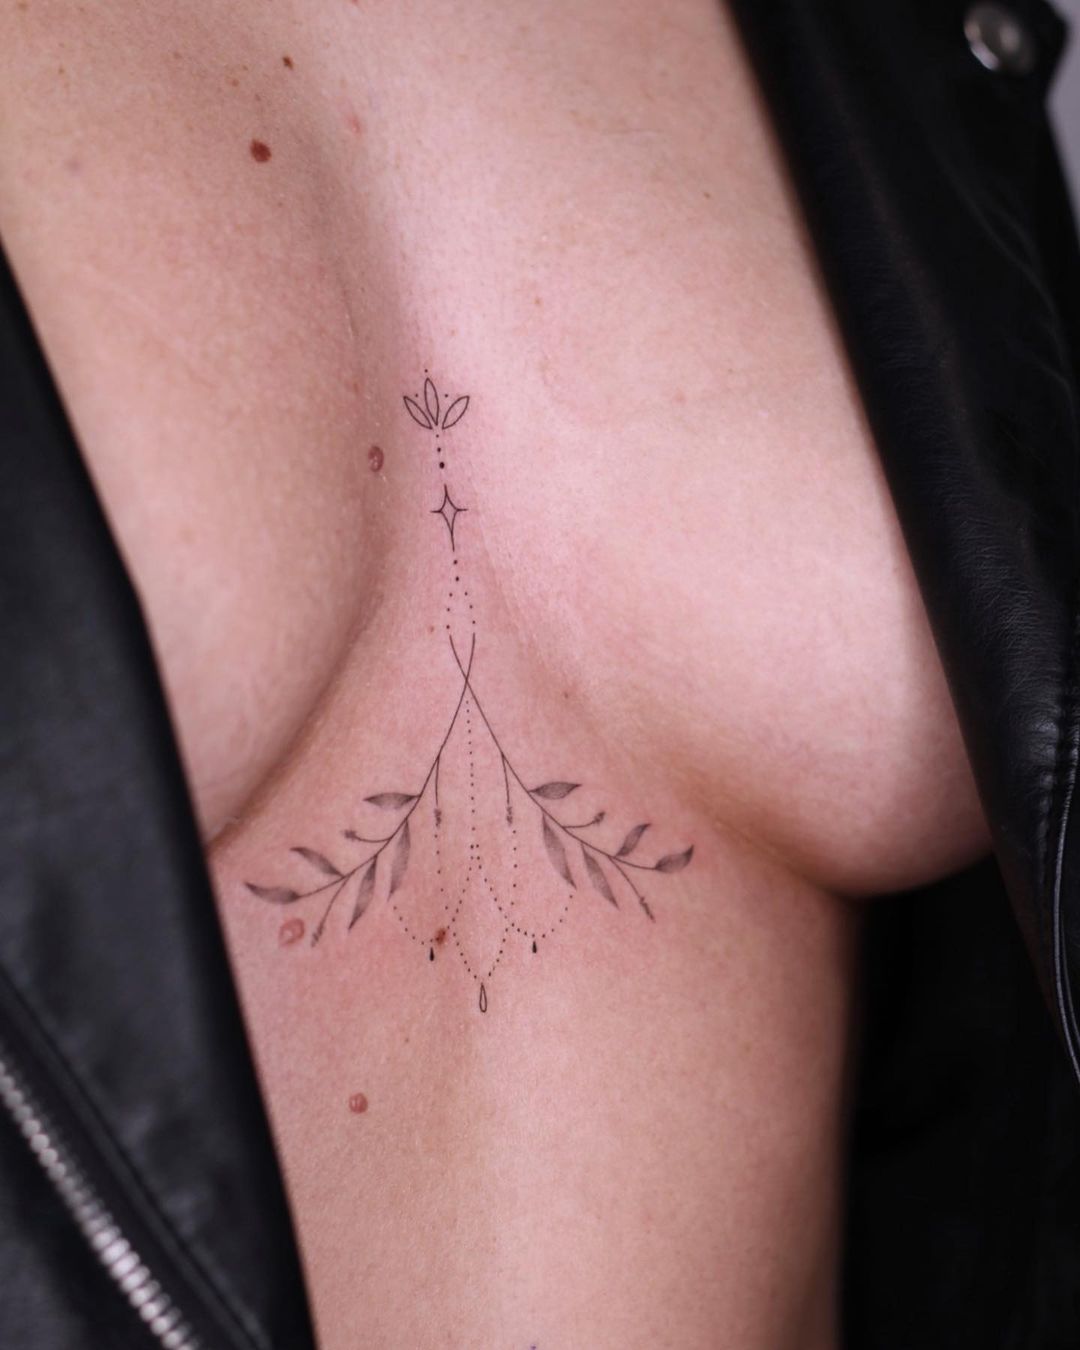 i wanted to do this sternum tattoo but i heard its painful and now im  just scared  what do you think  rTattooDesigns